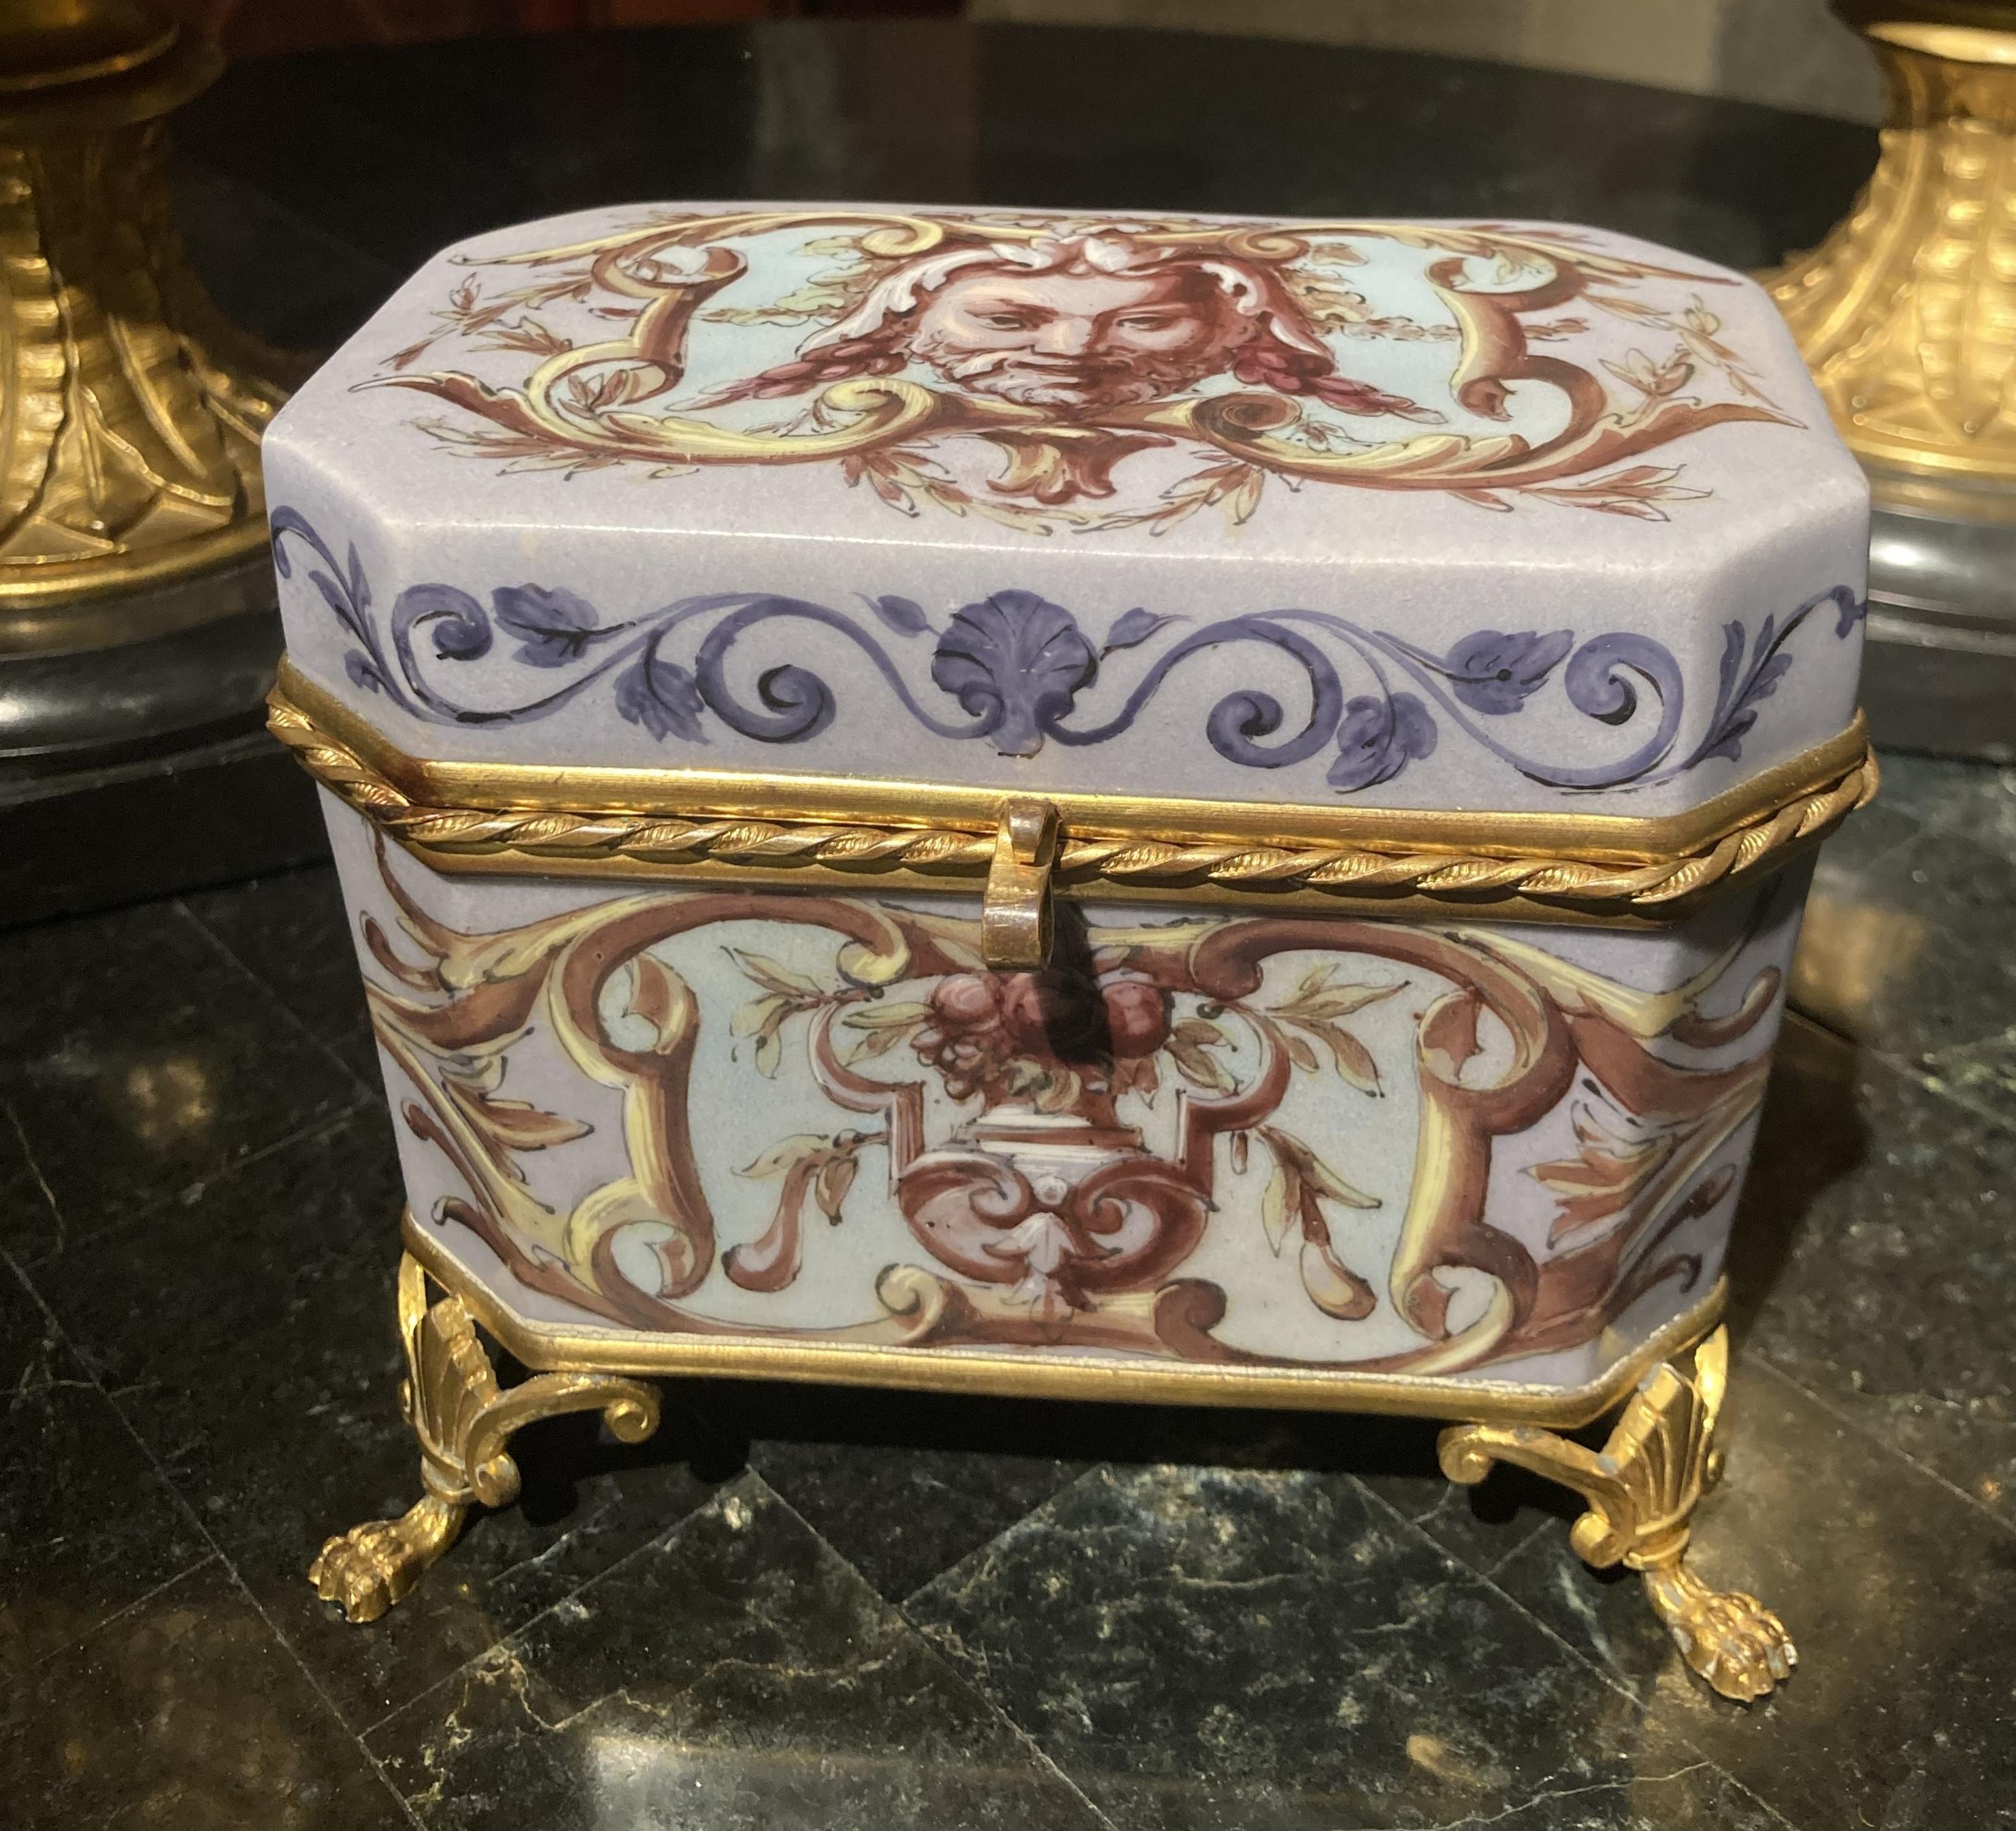 French 19th Century Empire Porcelain and Gilt Bronze Decorative Jewelry Box In Good Condition For Sale In Firenze, IT